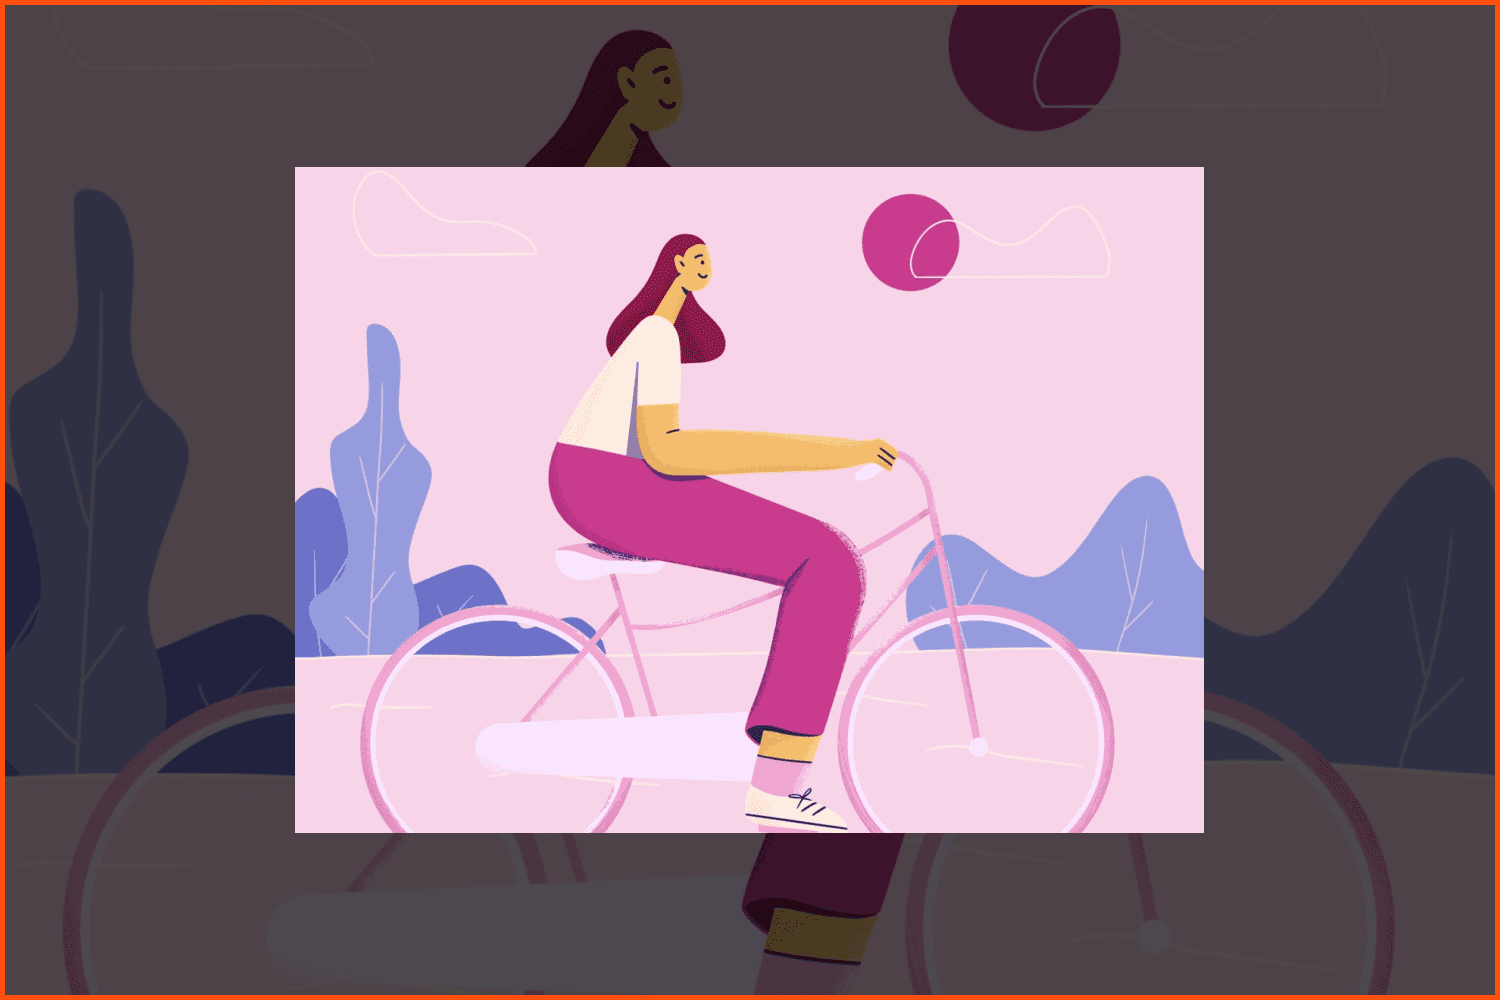 Drawn girl with disproportionately large legs on a bicycle.